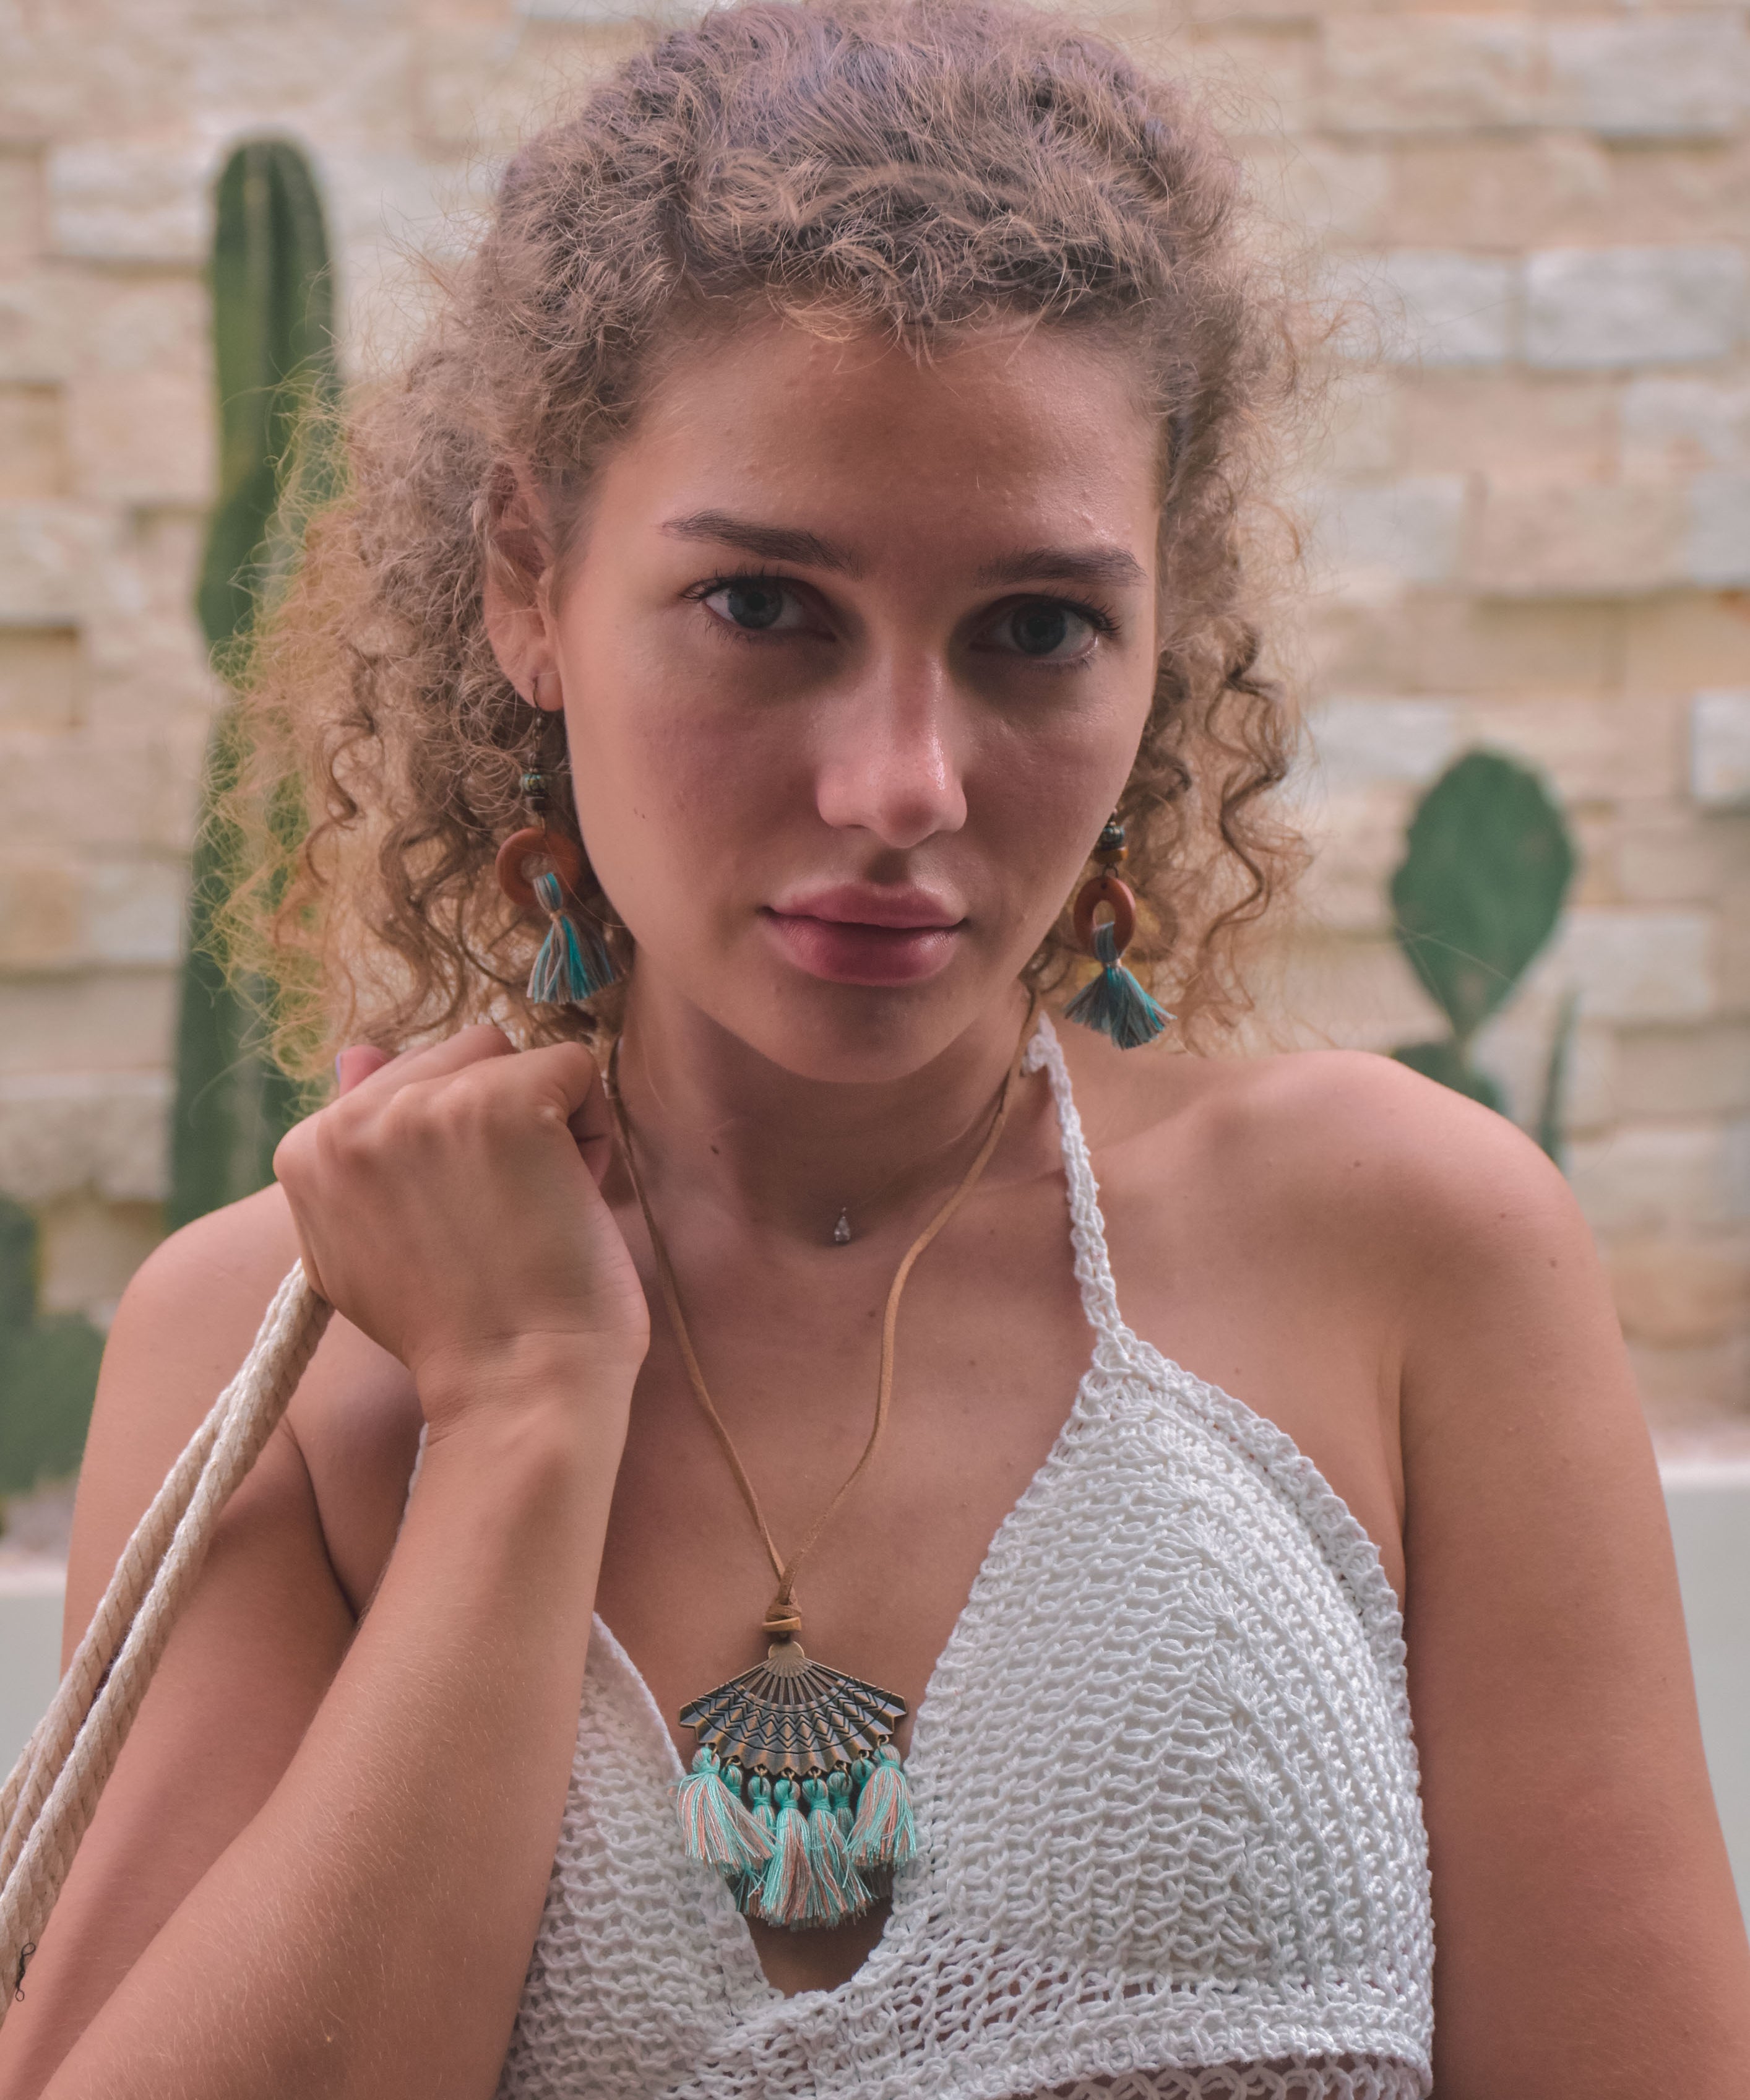 BALI EARRINGS Elepanta Earrings - Buy Today Elephant Pants Jewelry And Bohemian Clothes Handmade In Thailand Help To Save The Elephants FairTrade And Vegan